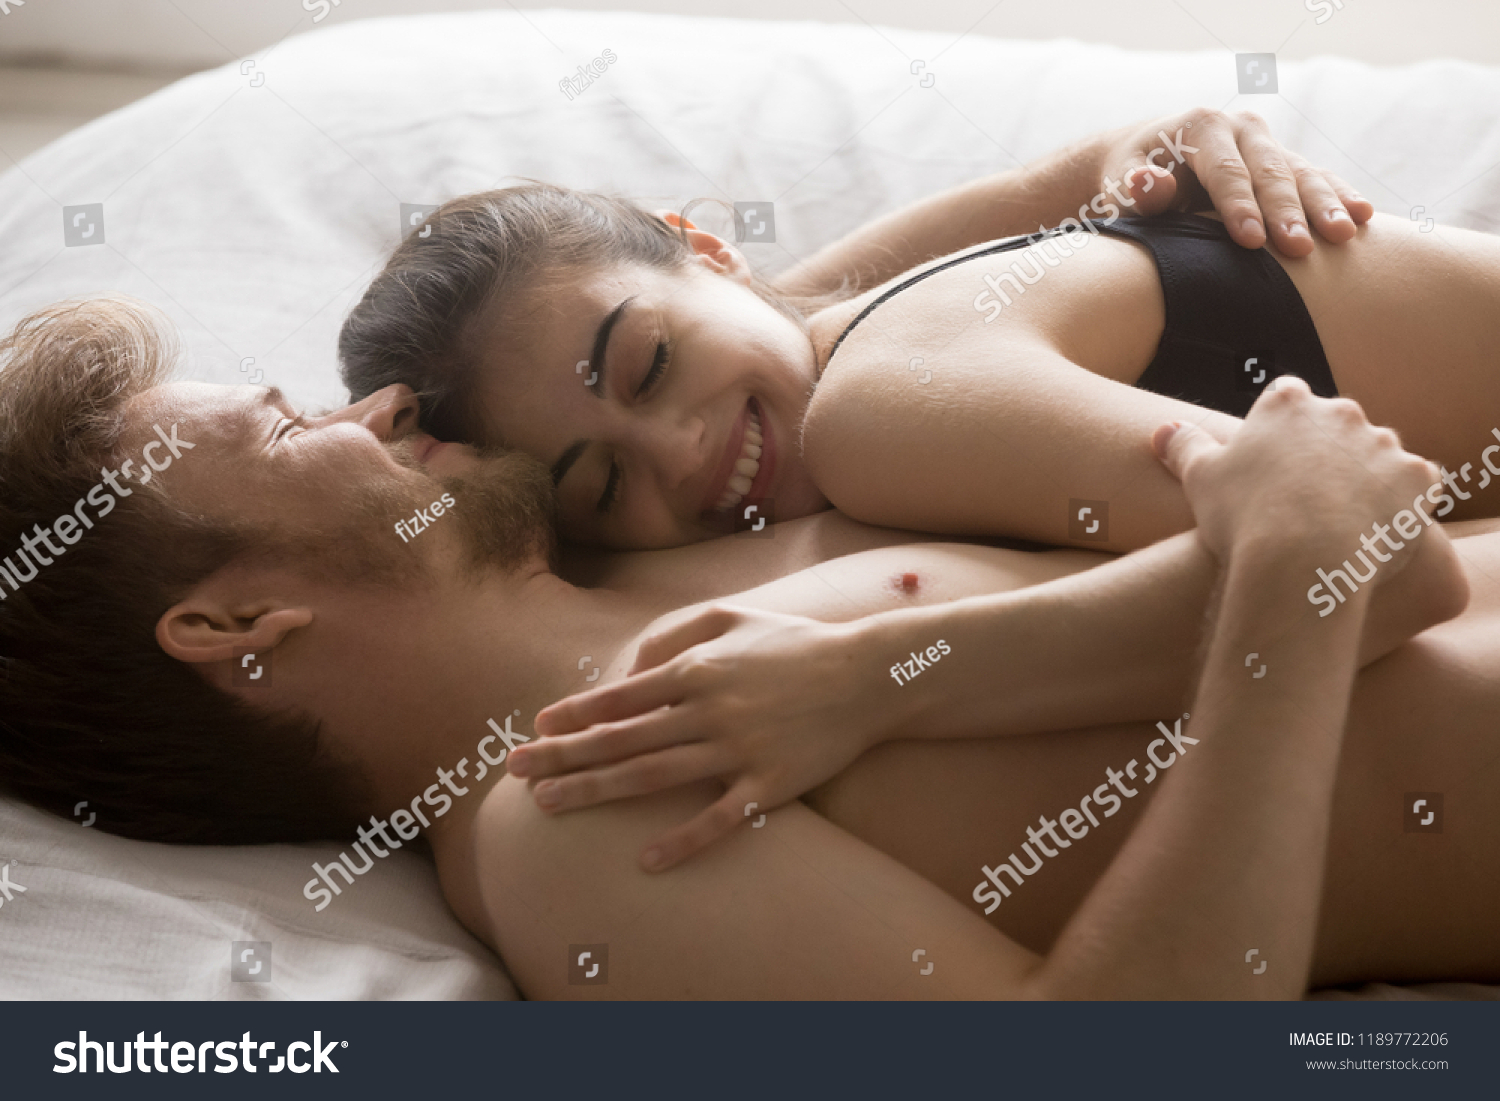 nude sex husband and wife